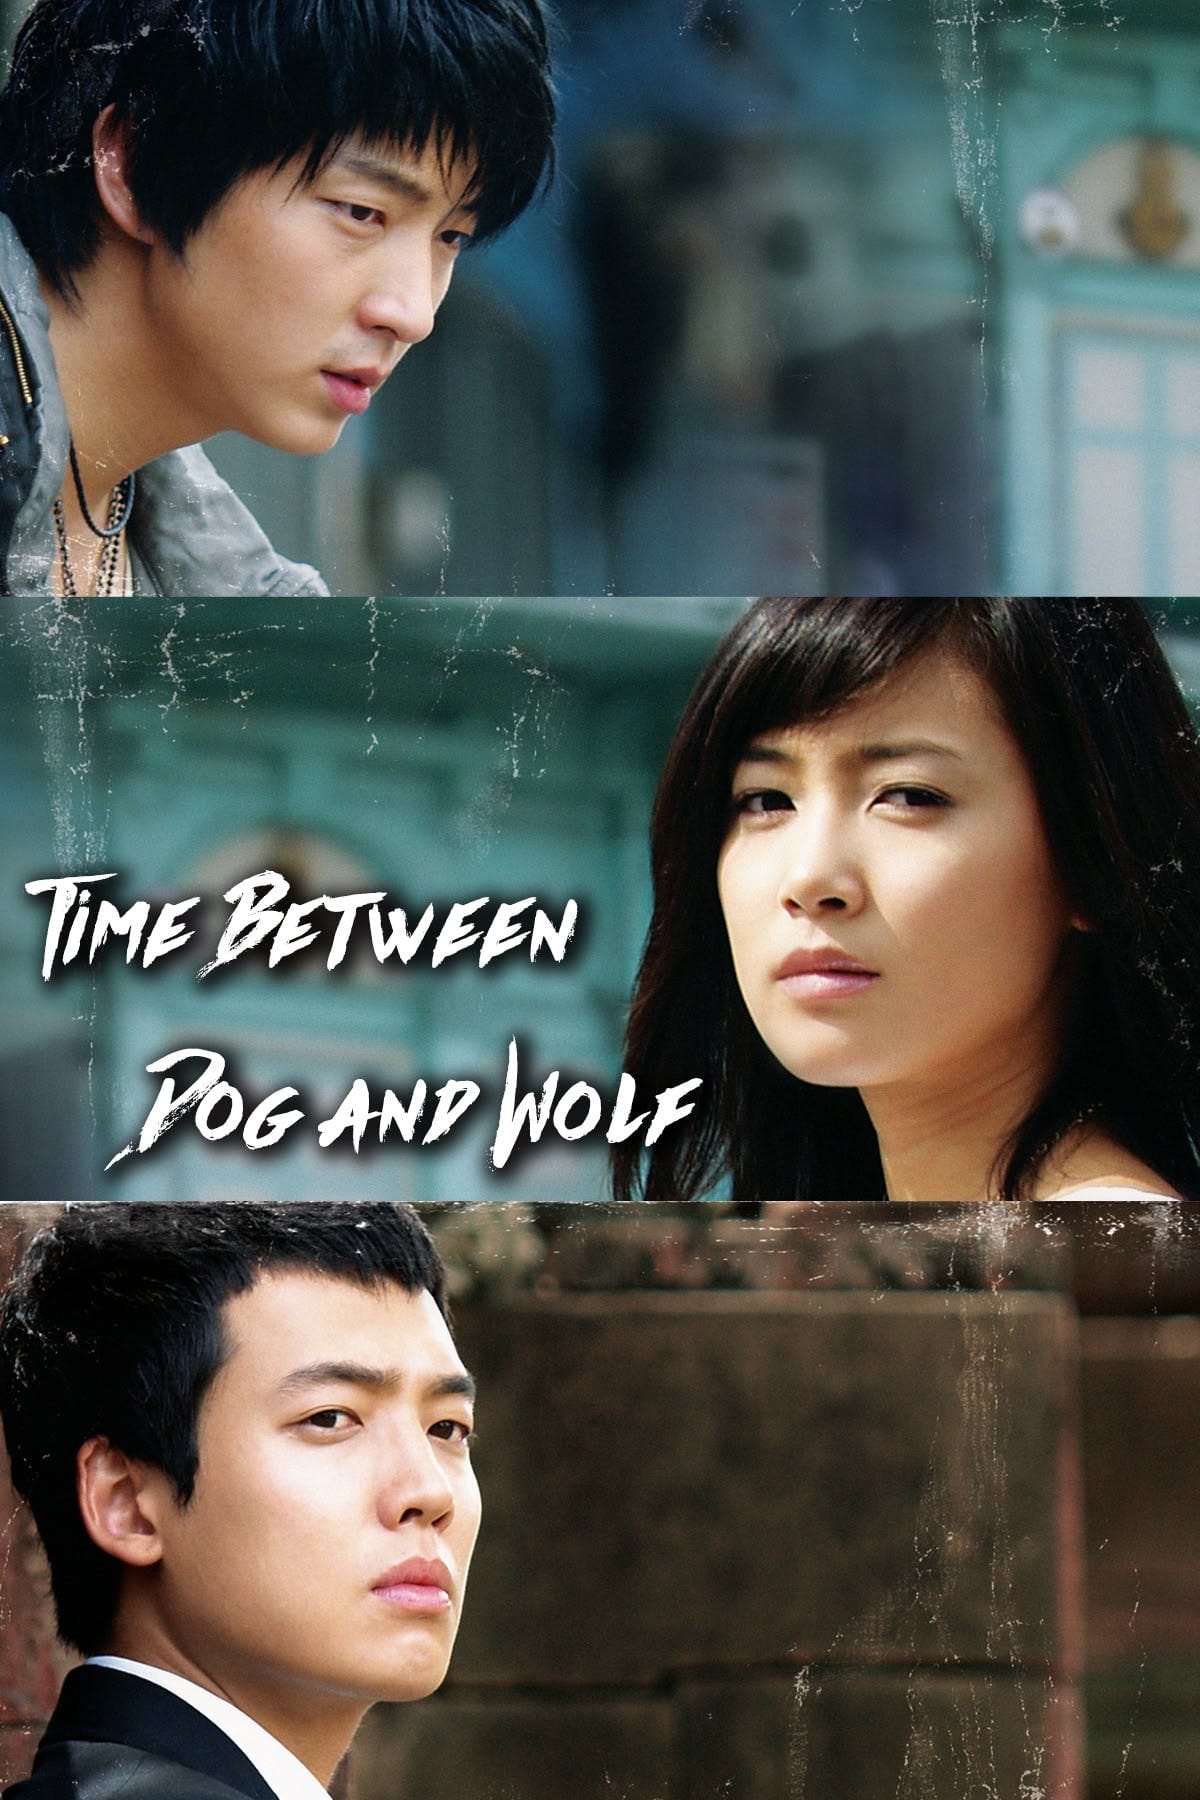 Time Between Dog and Wolf